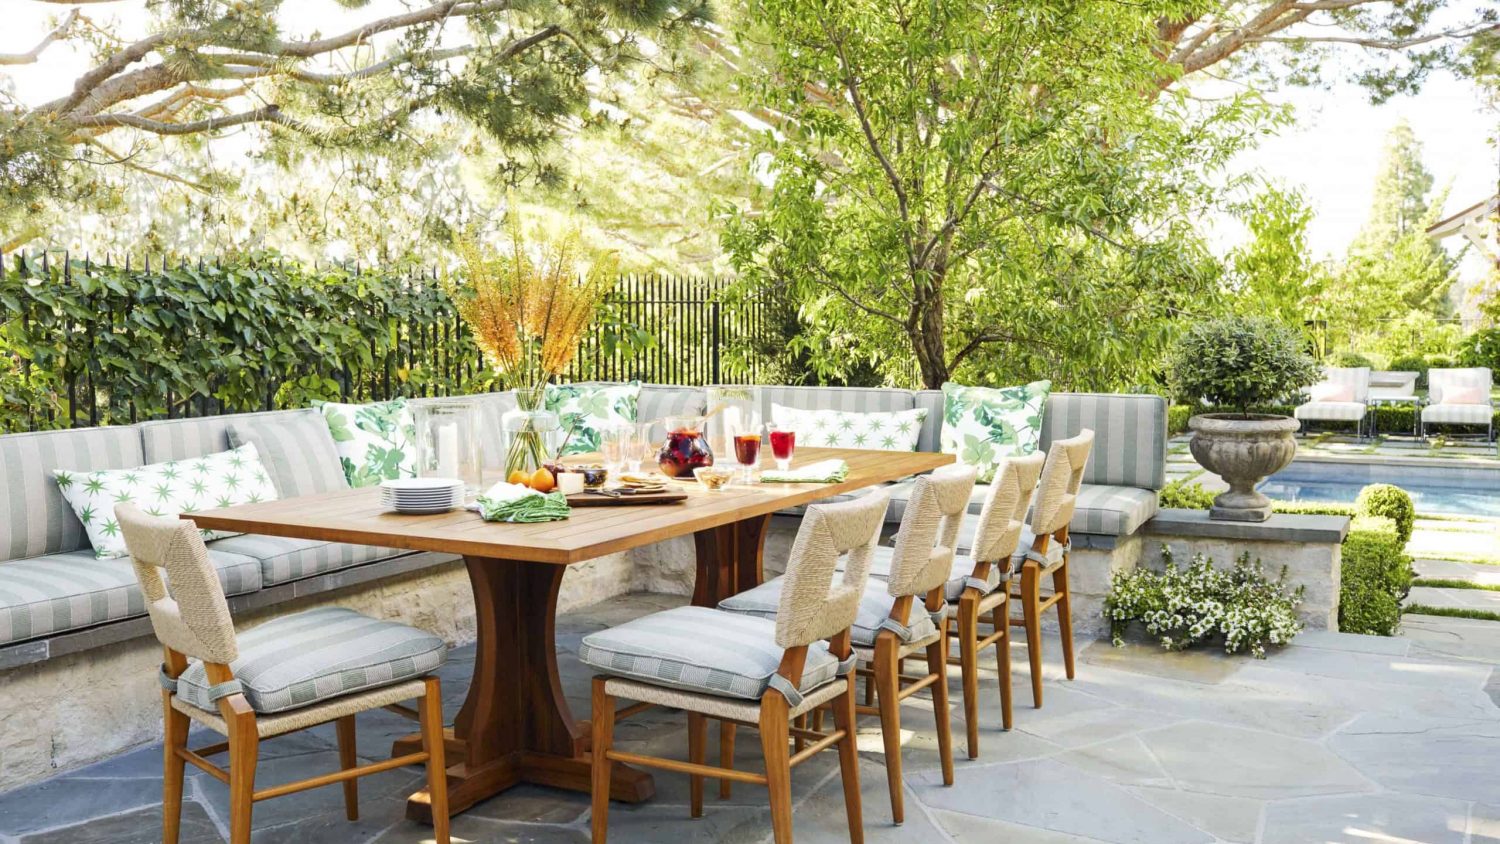 5 Best Garden Dining Sets for Perfect Summer Get-Togethers